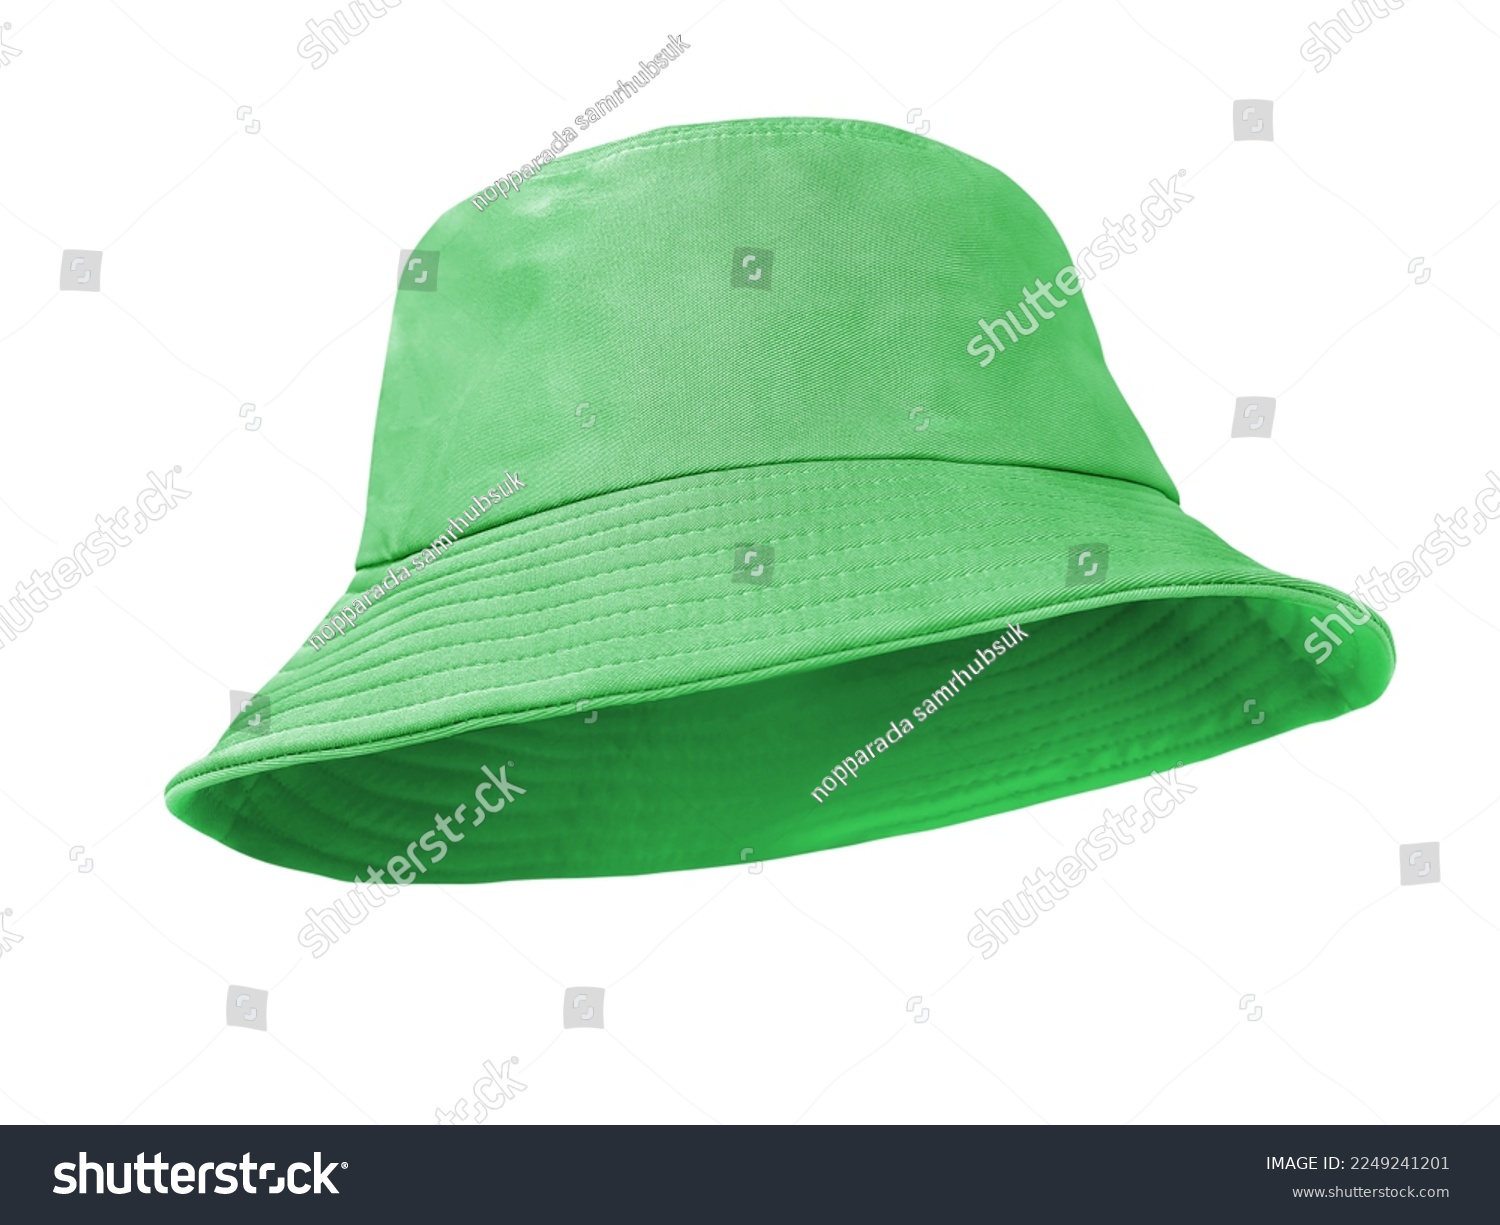 Green bucket hat isolated on white background #2249241201